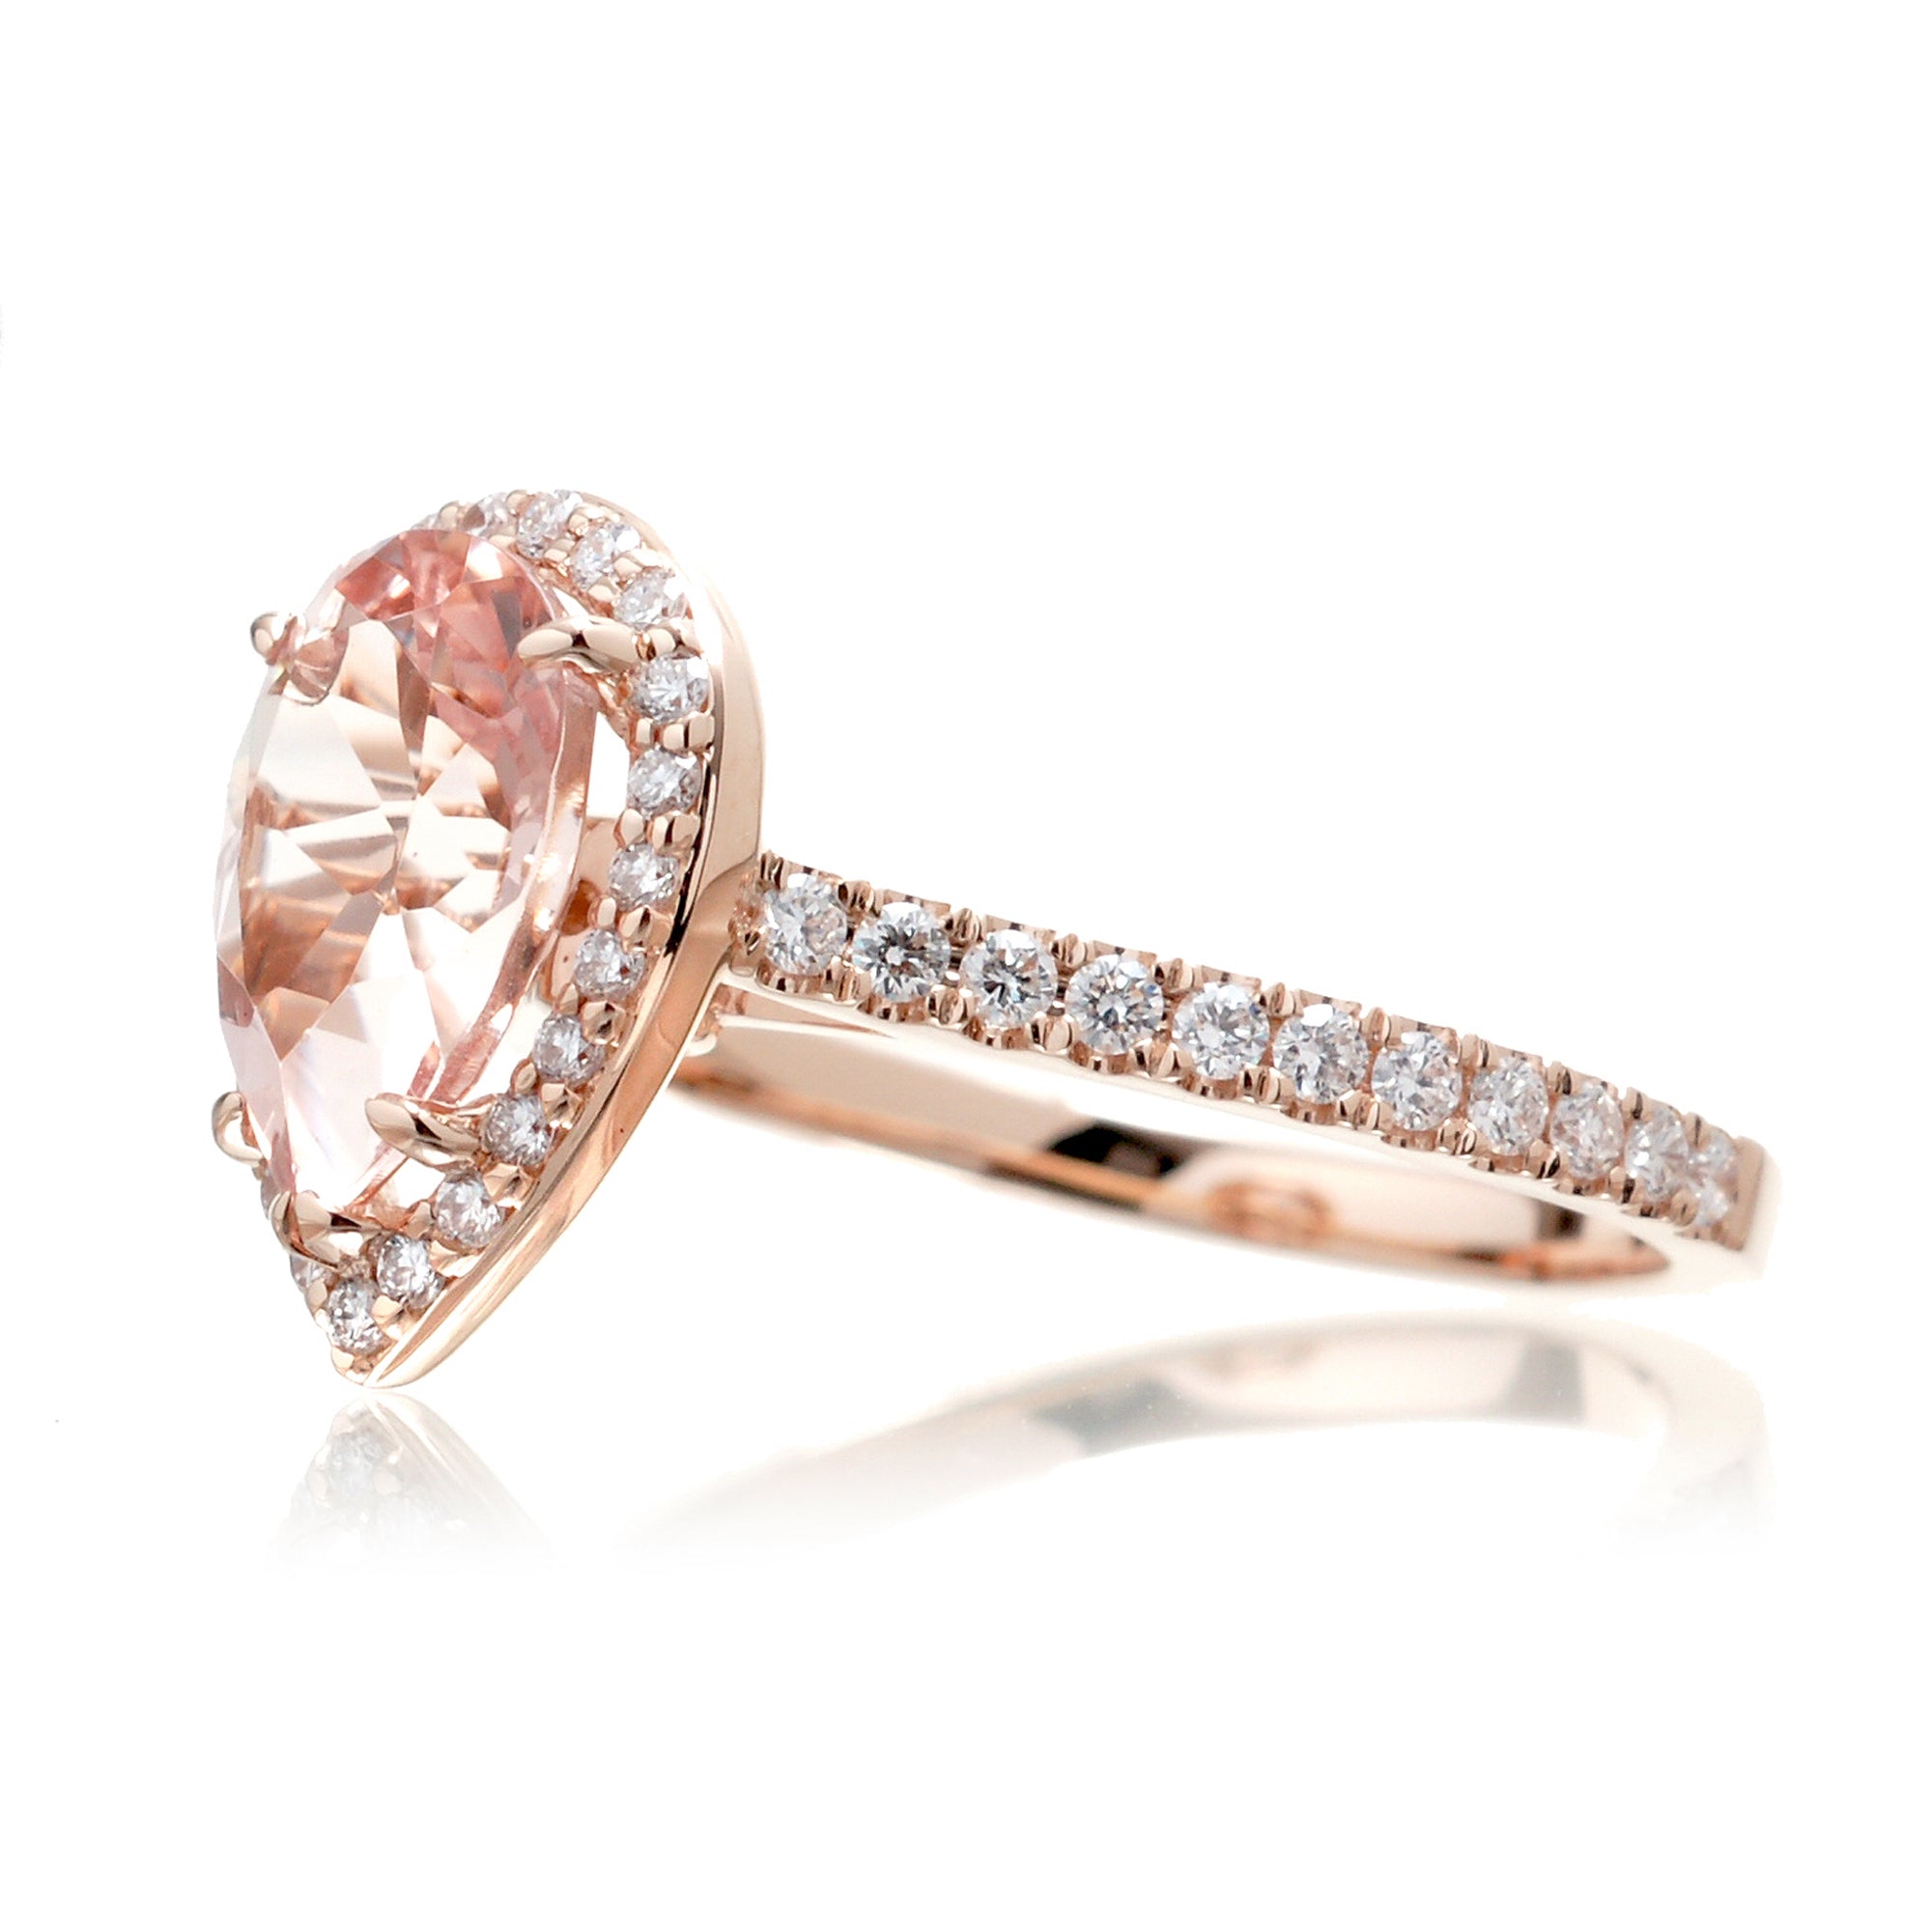 Pear cut morganite ring with diamond halo and band in the Sunset rose gold